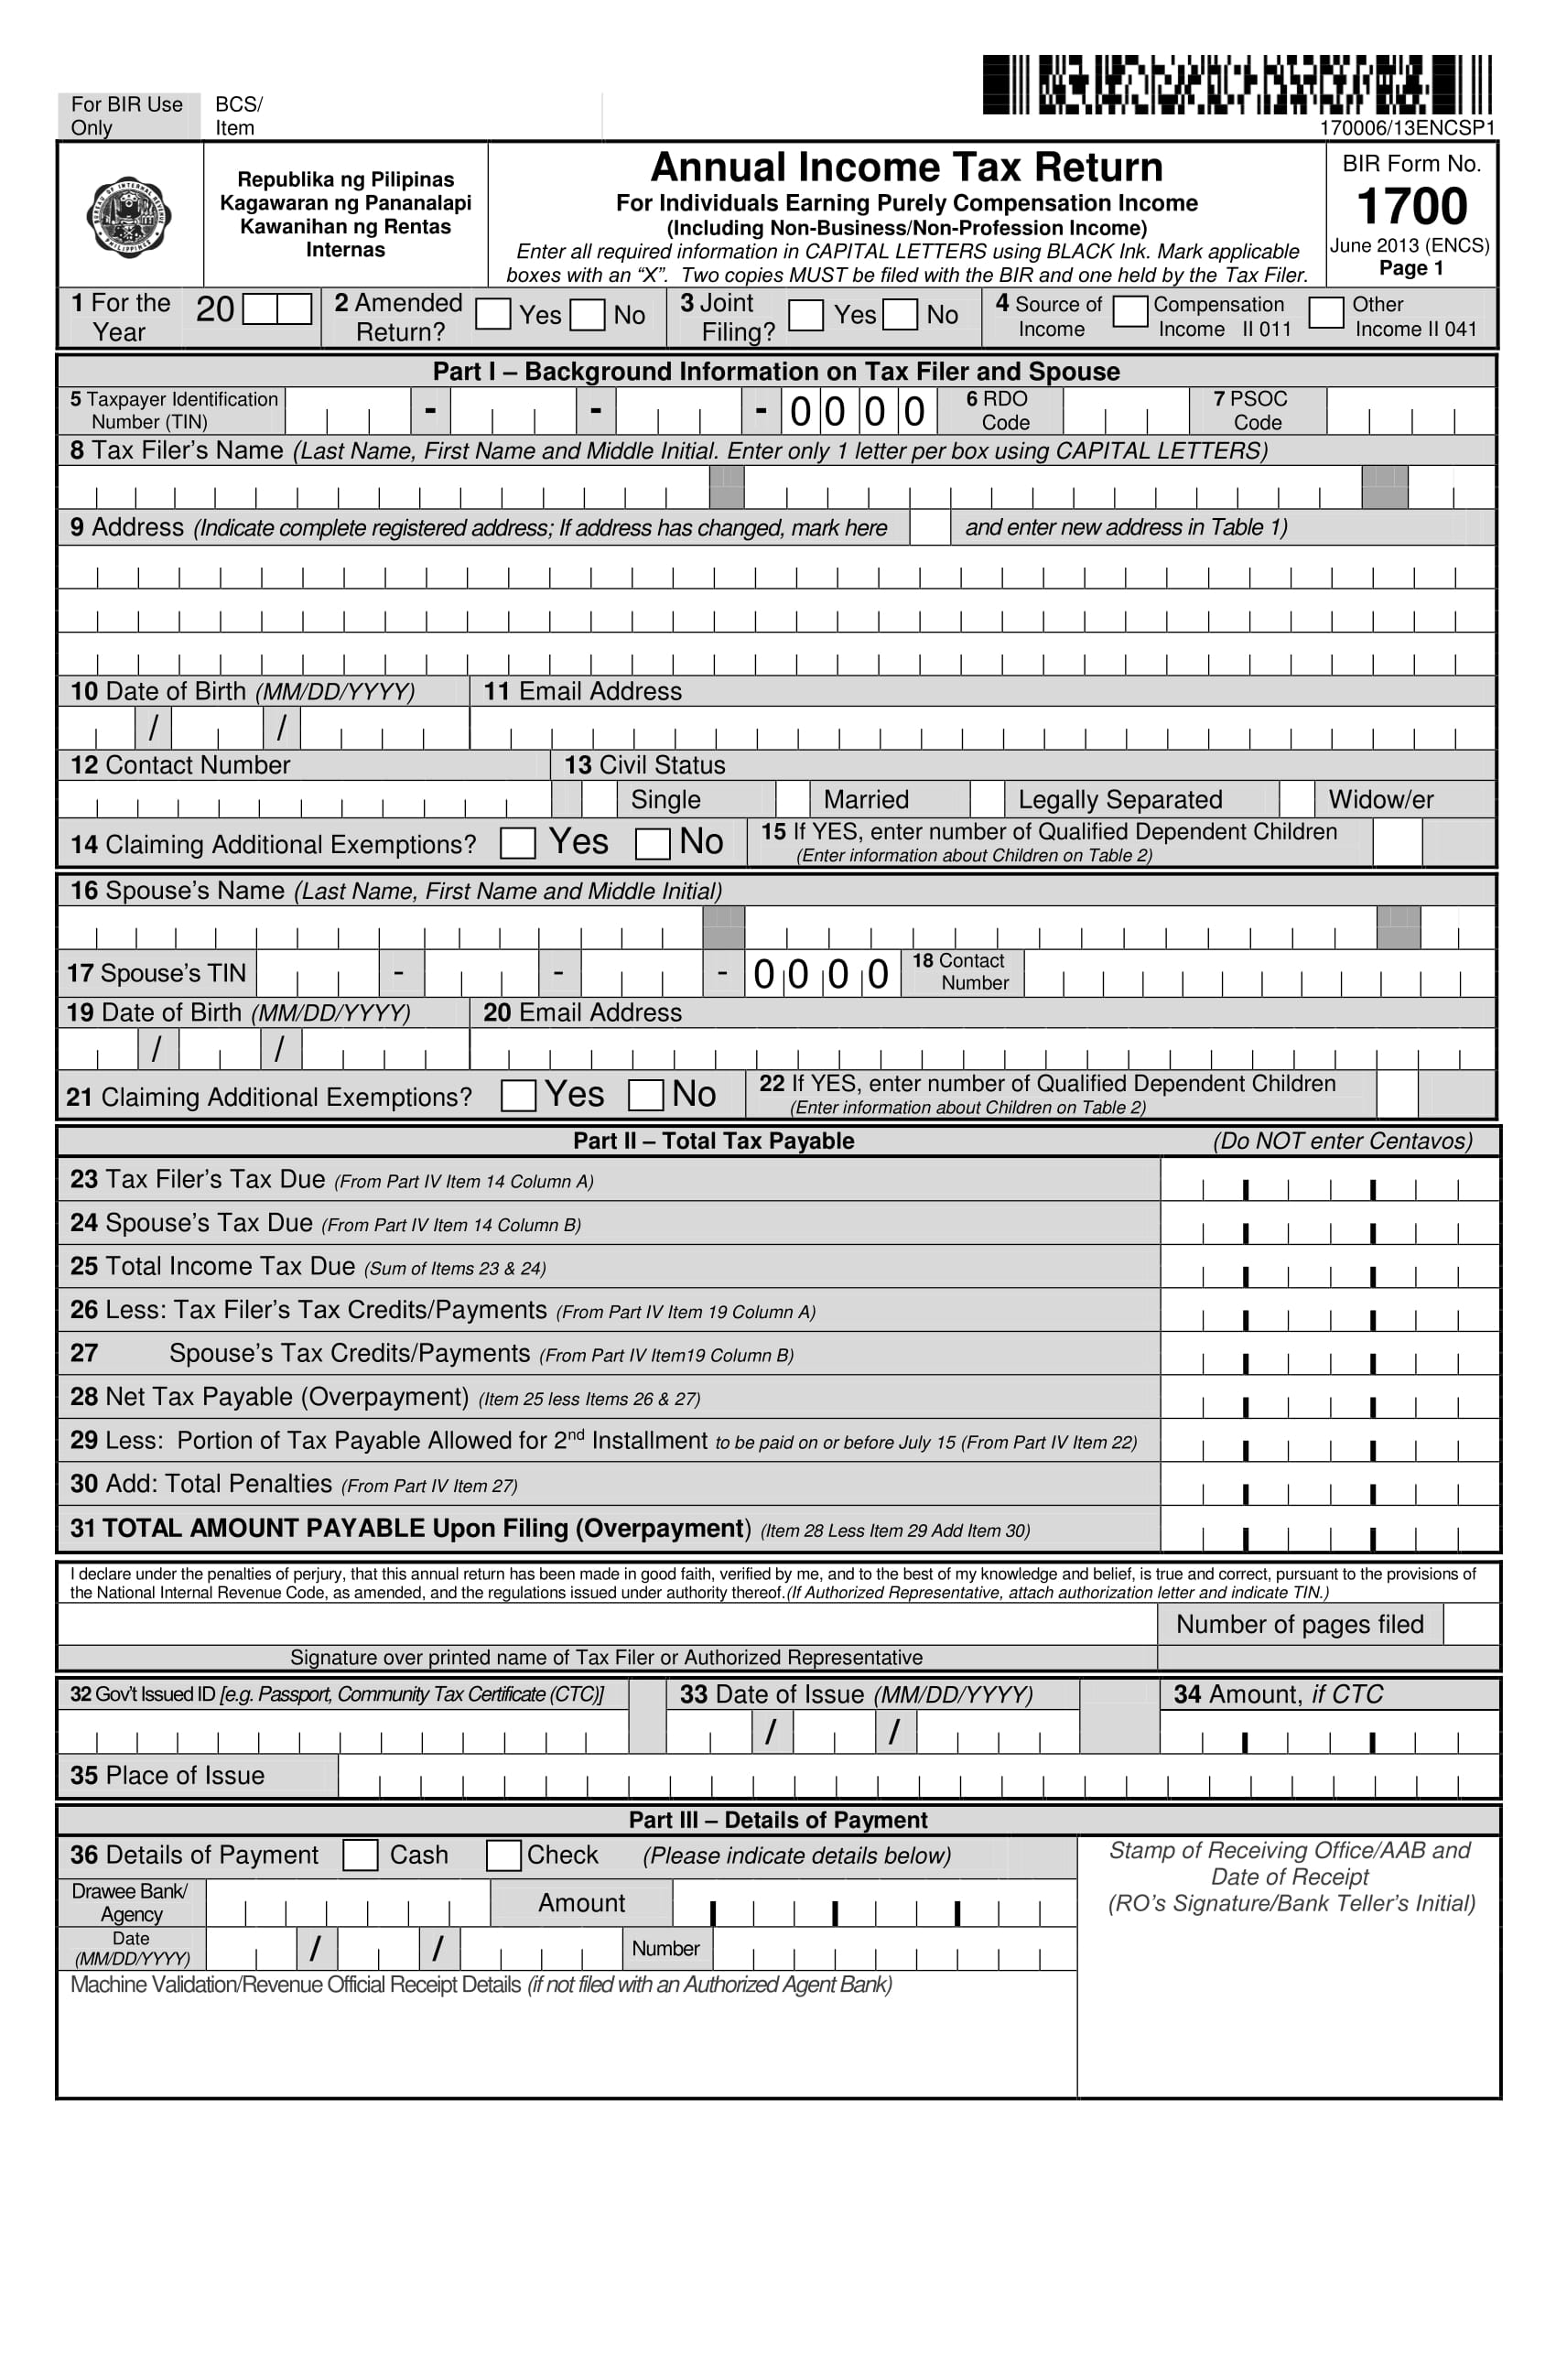 official income tax statement form 1